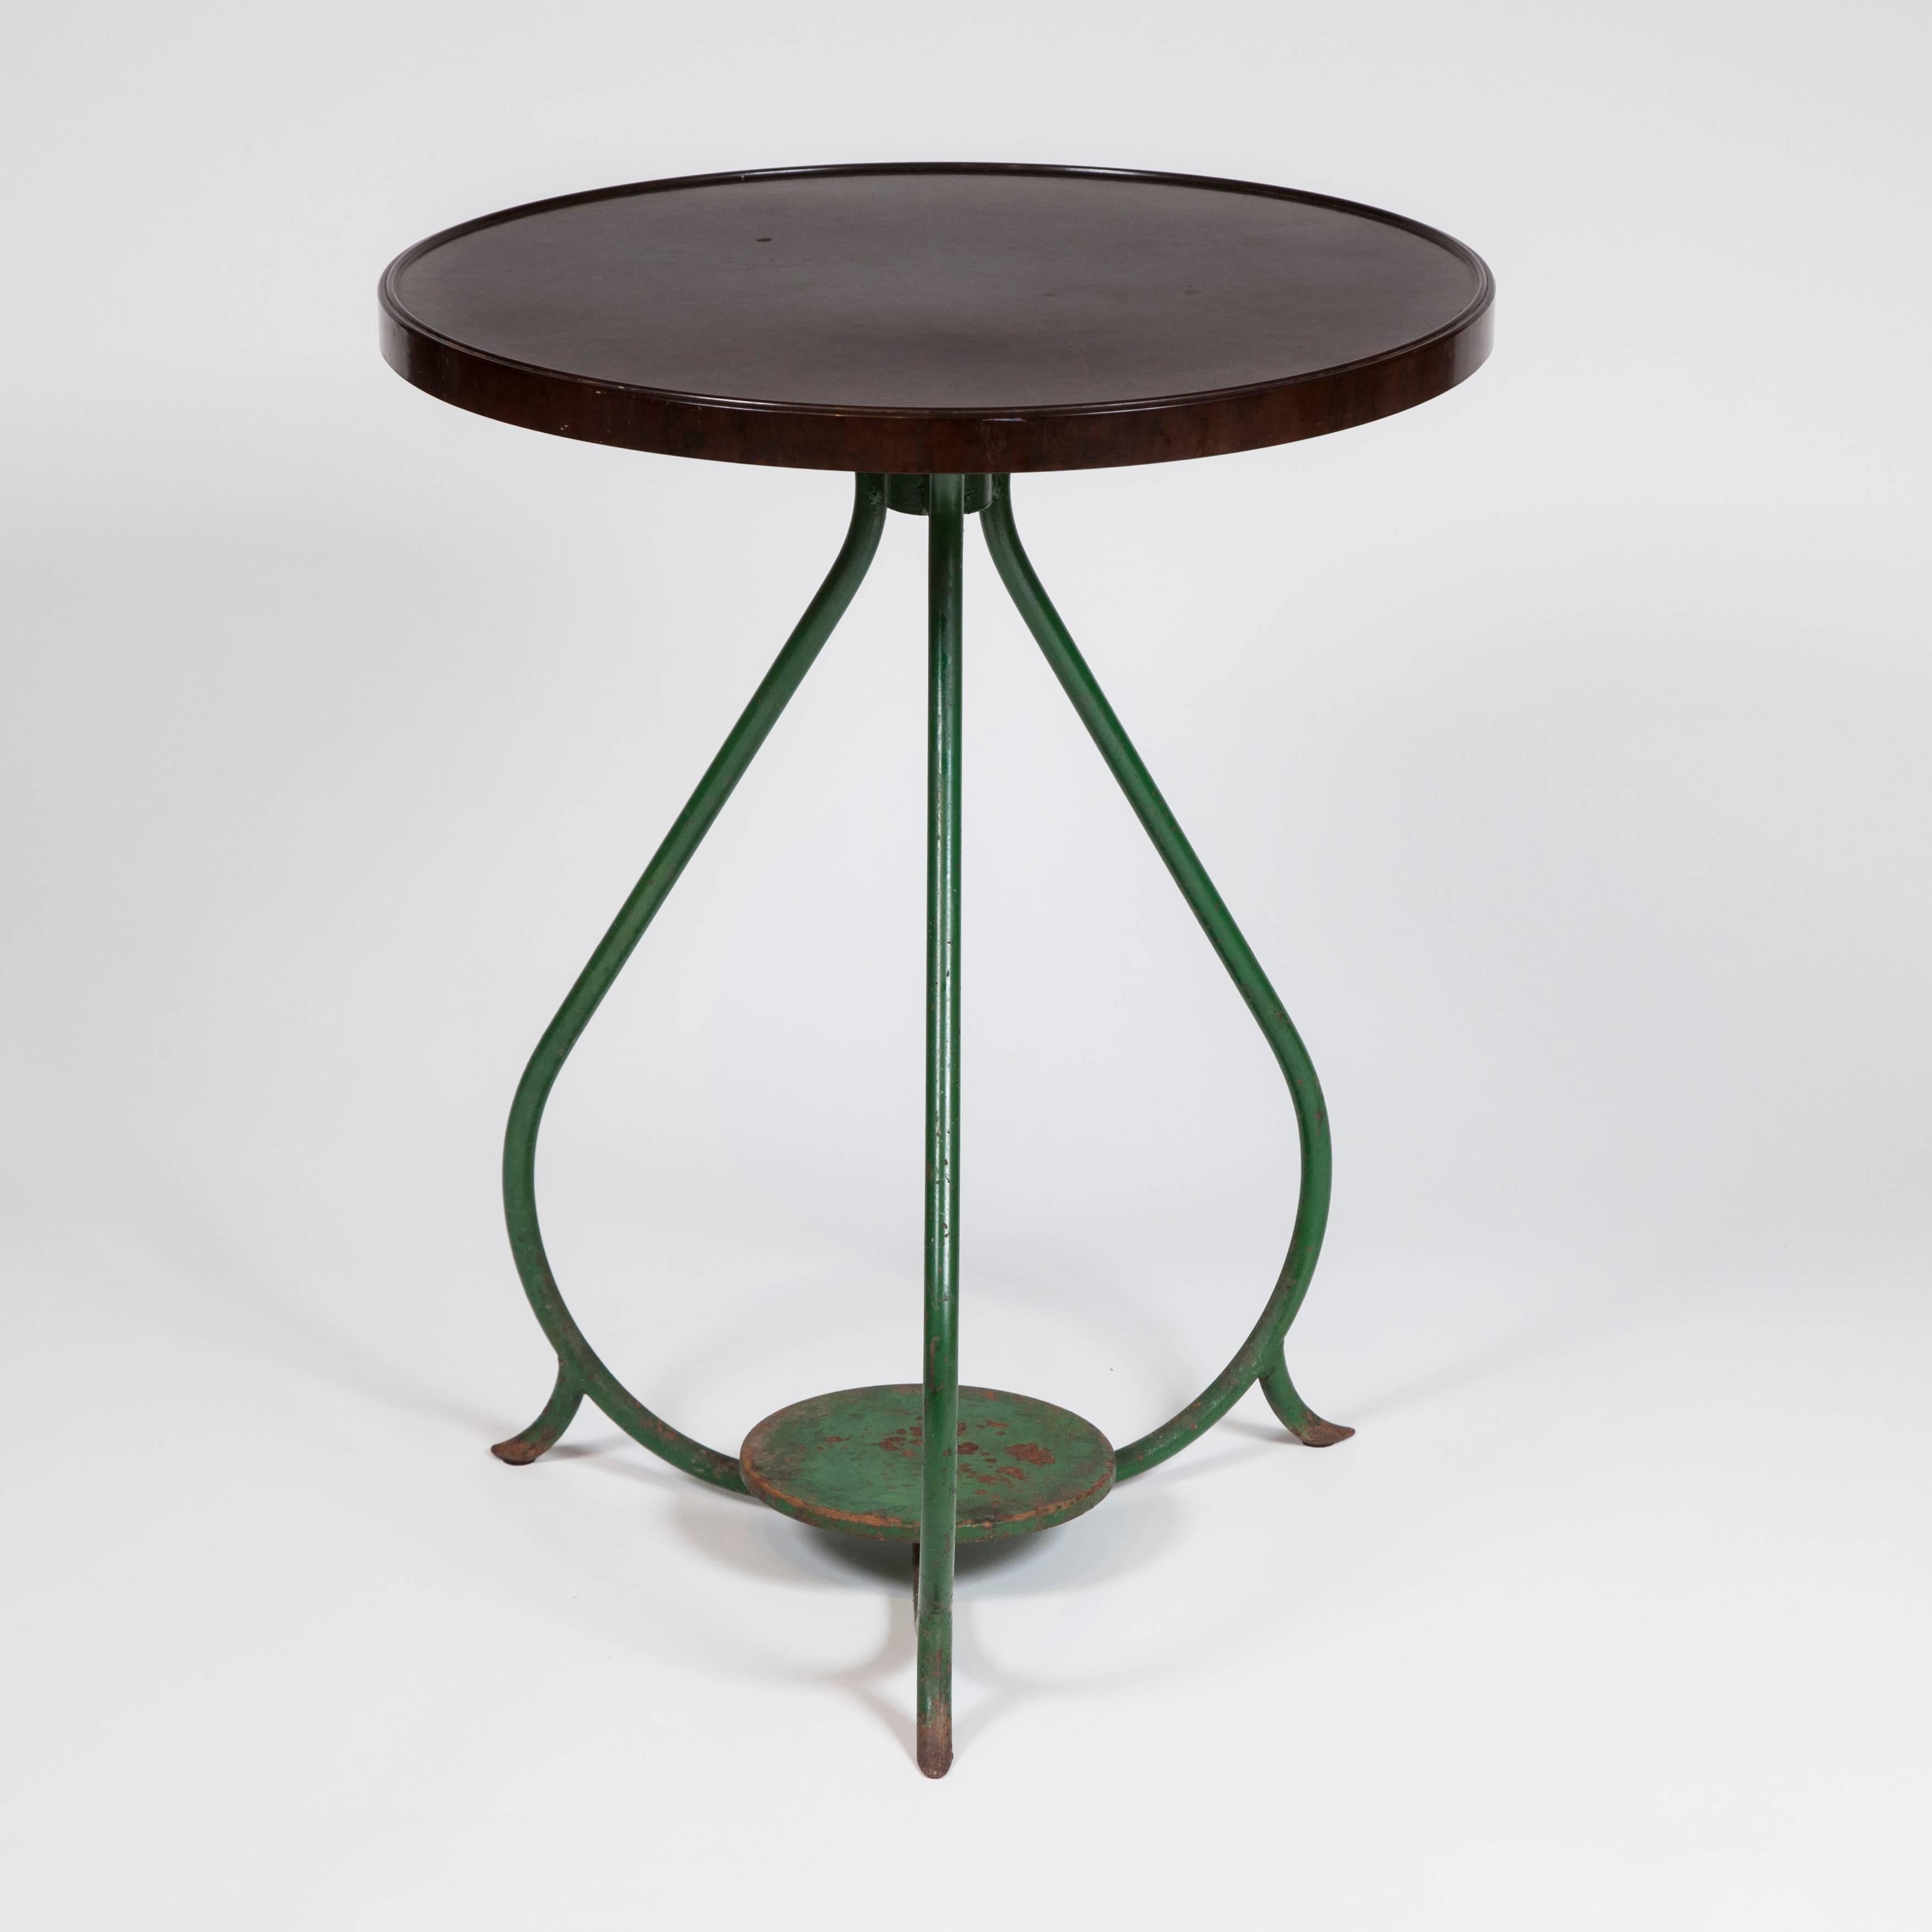 A French bistro table with circular bakelite top and green painted iron legs.